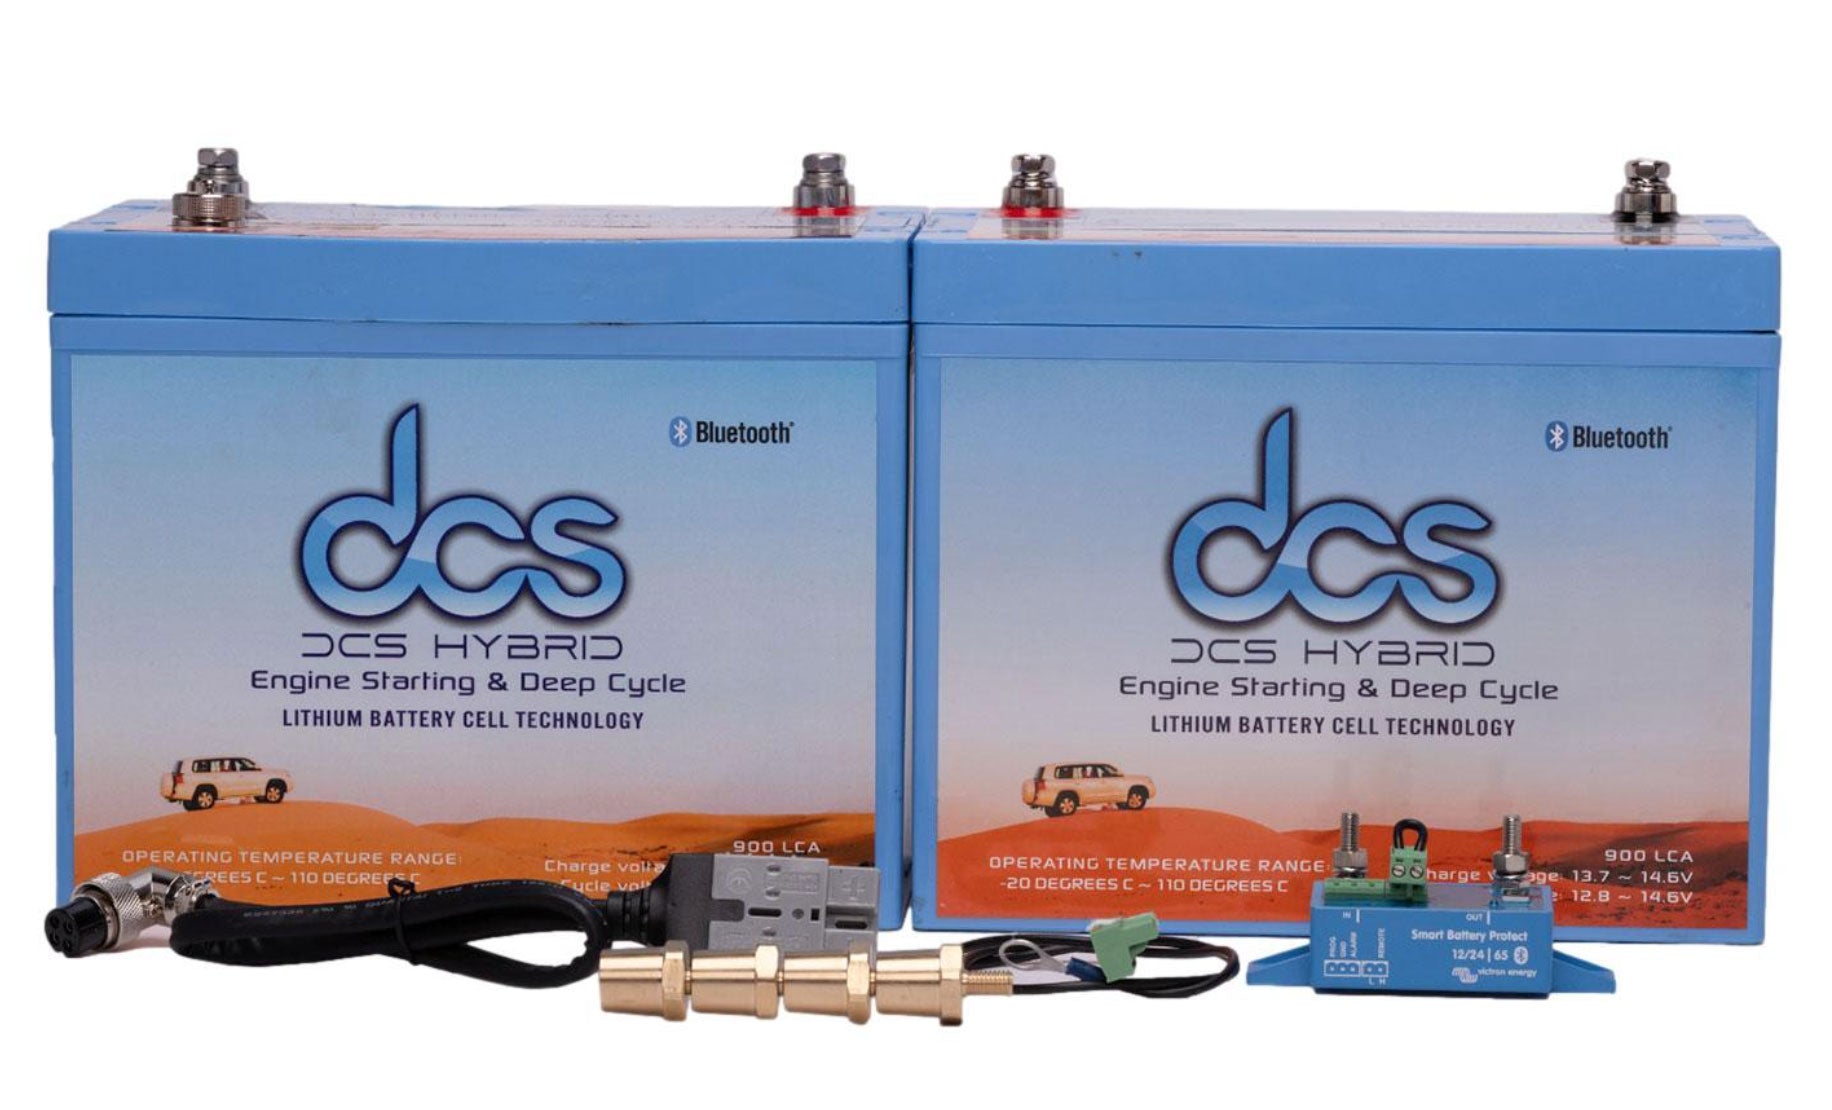 DCS Hybrid Engine Starting and Deep Cycle batteries